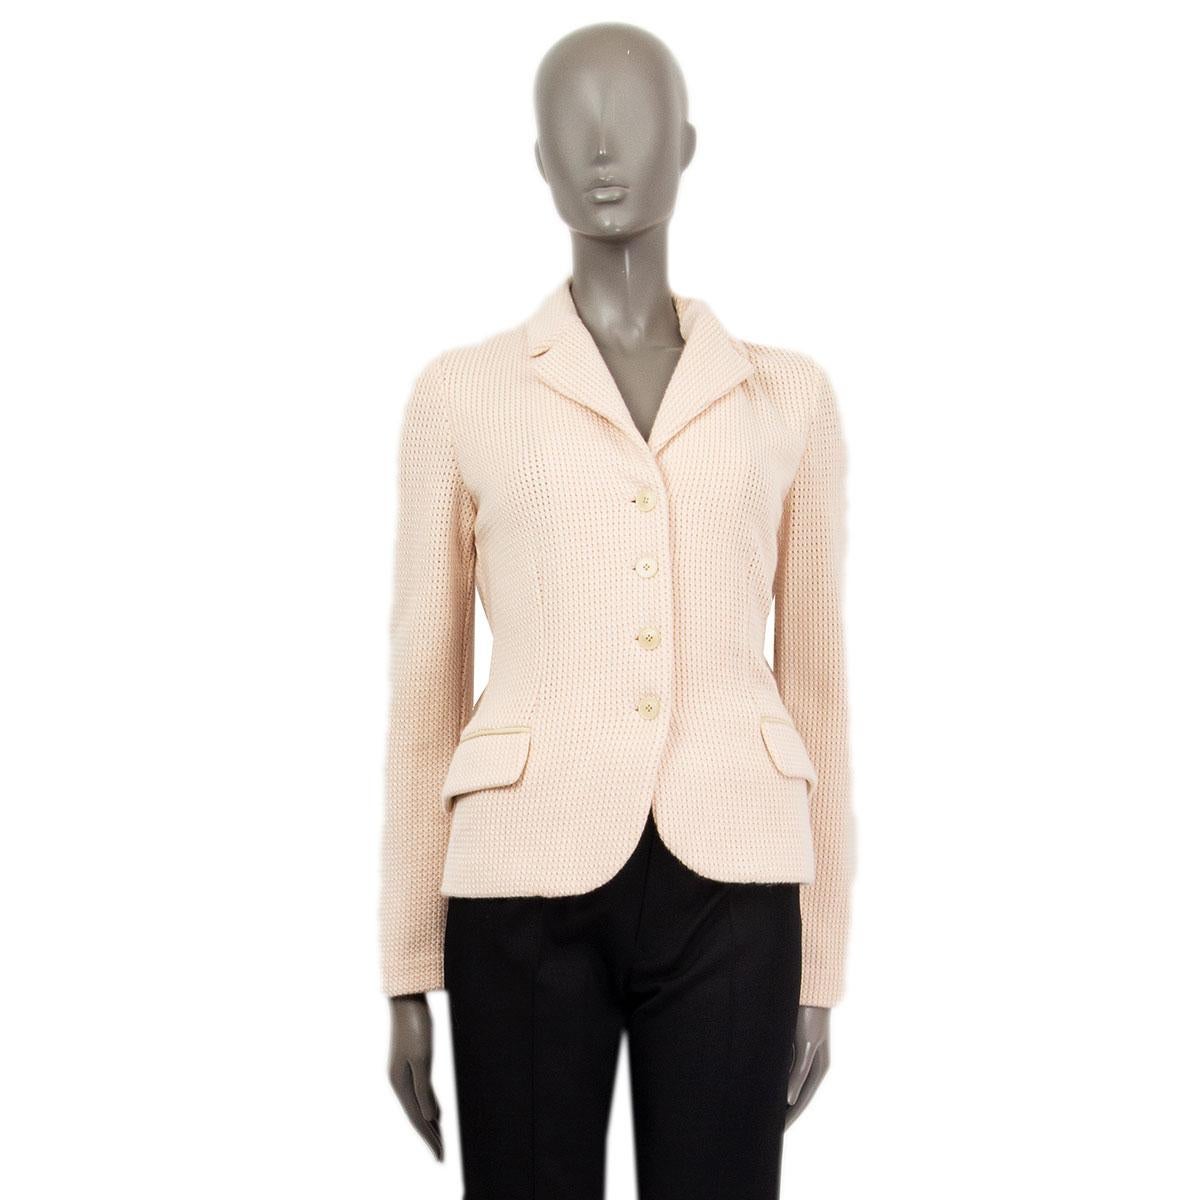 100% authentic Loro Piana Suede-Collar Knit-Jacket in pastel pink and white baby cashmere (100%) and with beige suede goatskin (100%) details at the downside collar and pockets. Closes with 4 buttons on the front, has a notch collar and flap